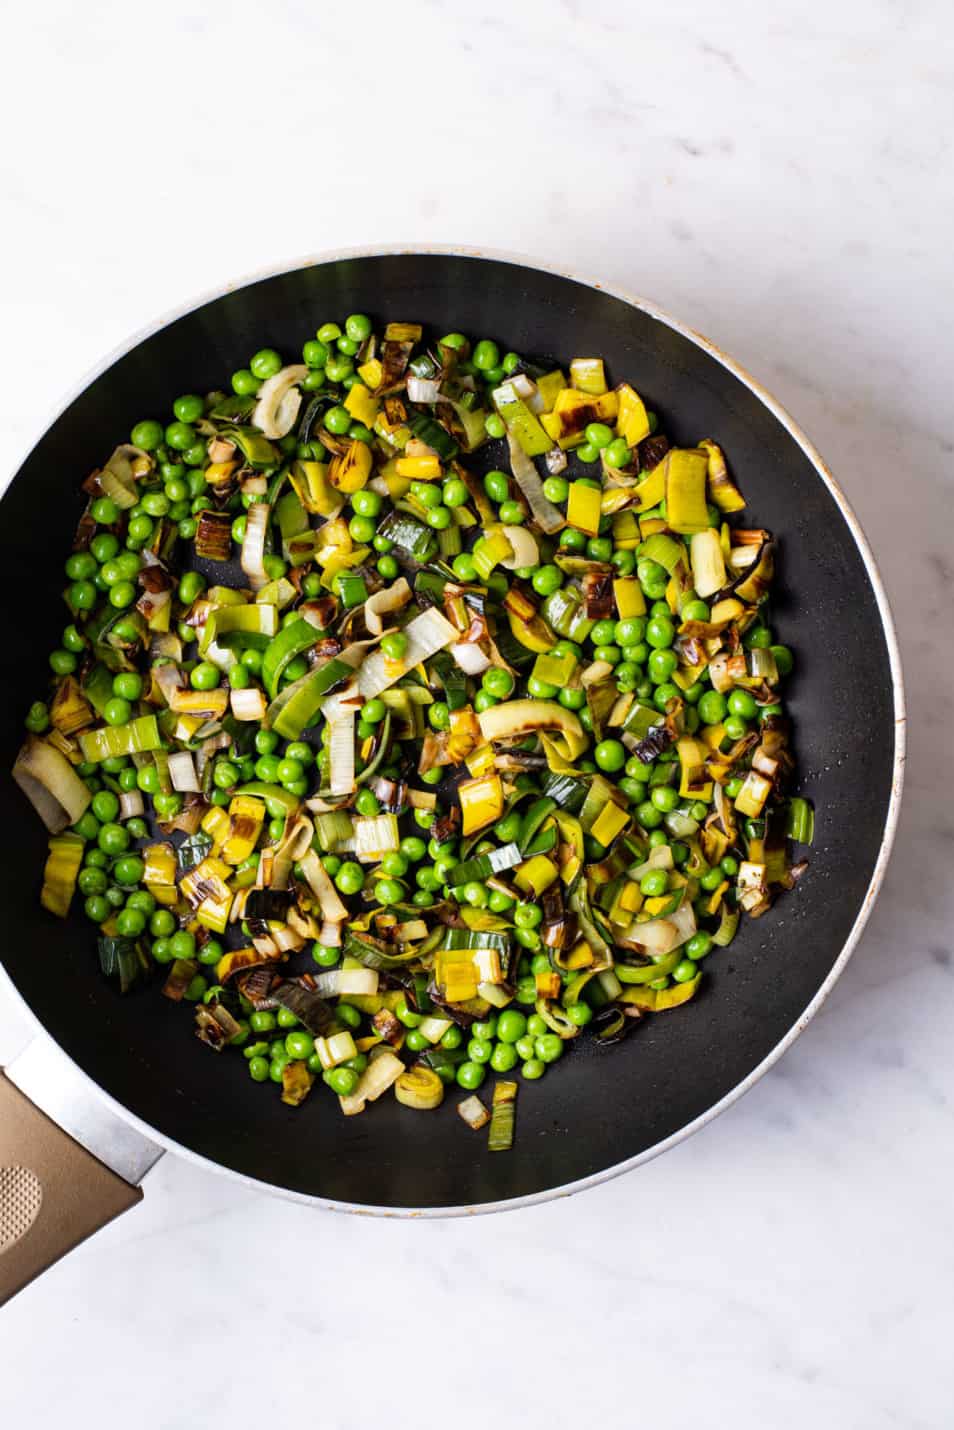 Fried leeks and peas in a skillet